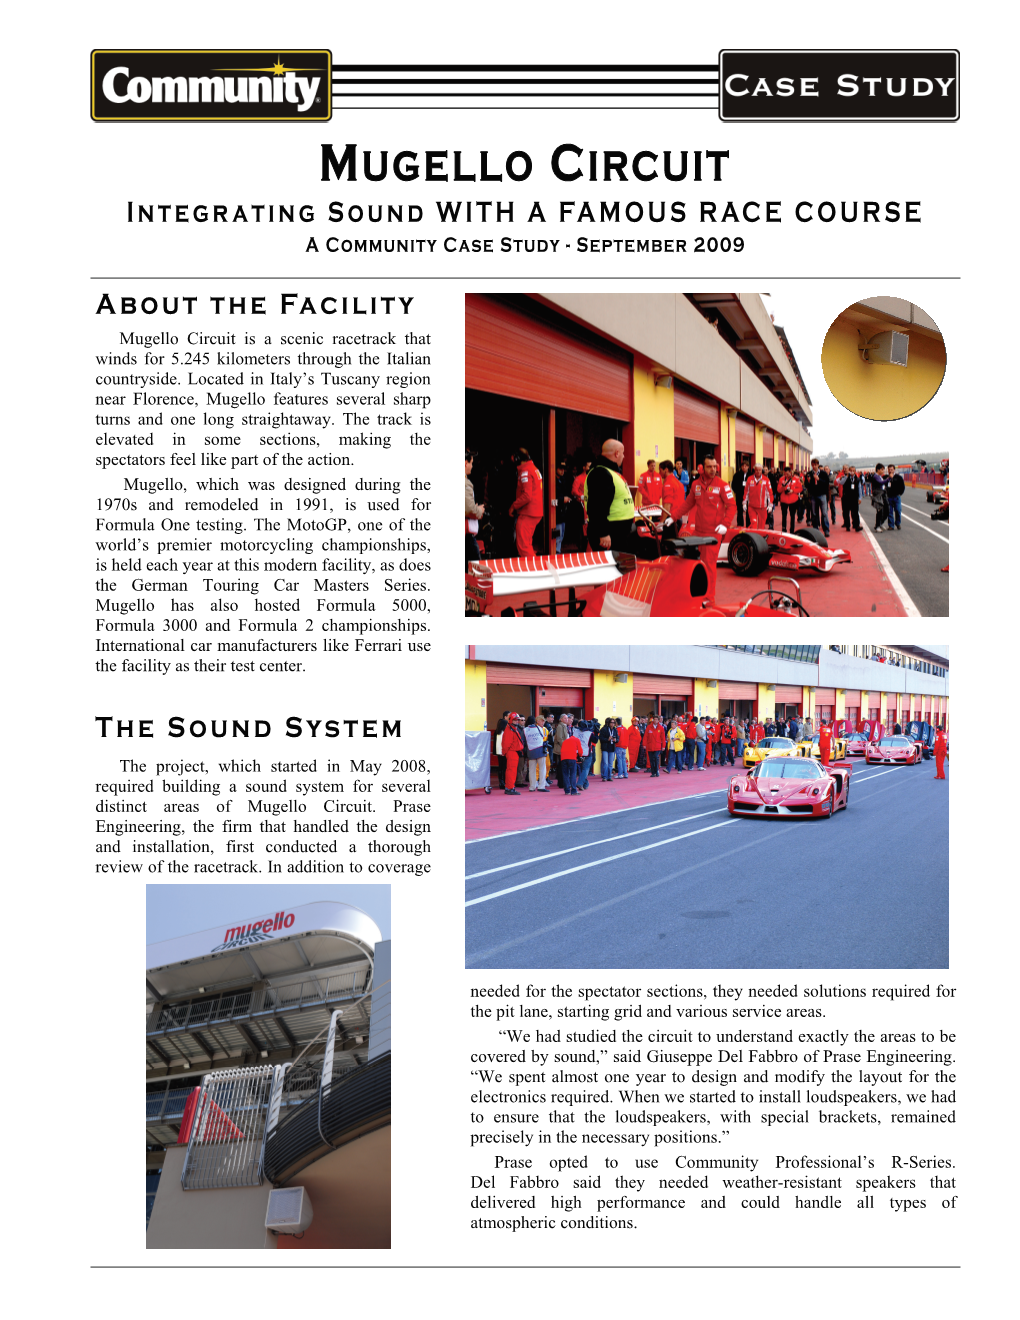 MUGELLO CIRCUIT Integrating Sound with a FAMOUS RACE COURSE a Community Case Study - September 2009